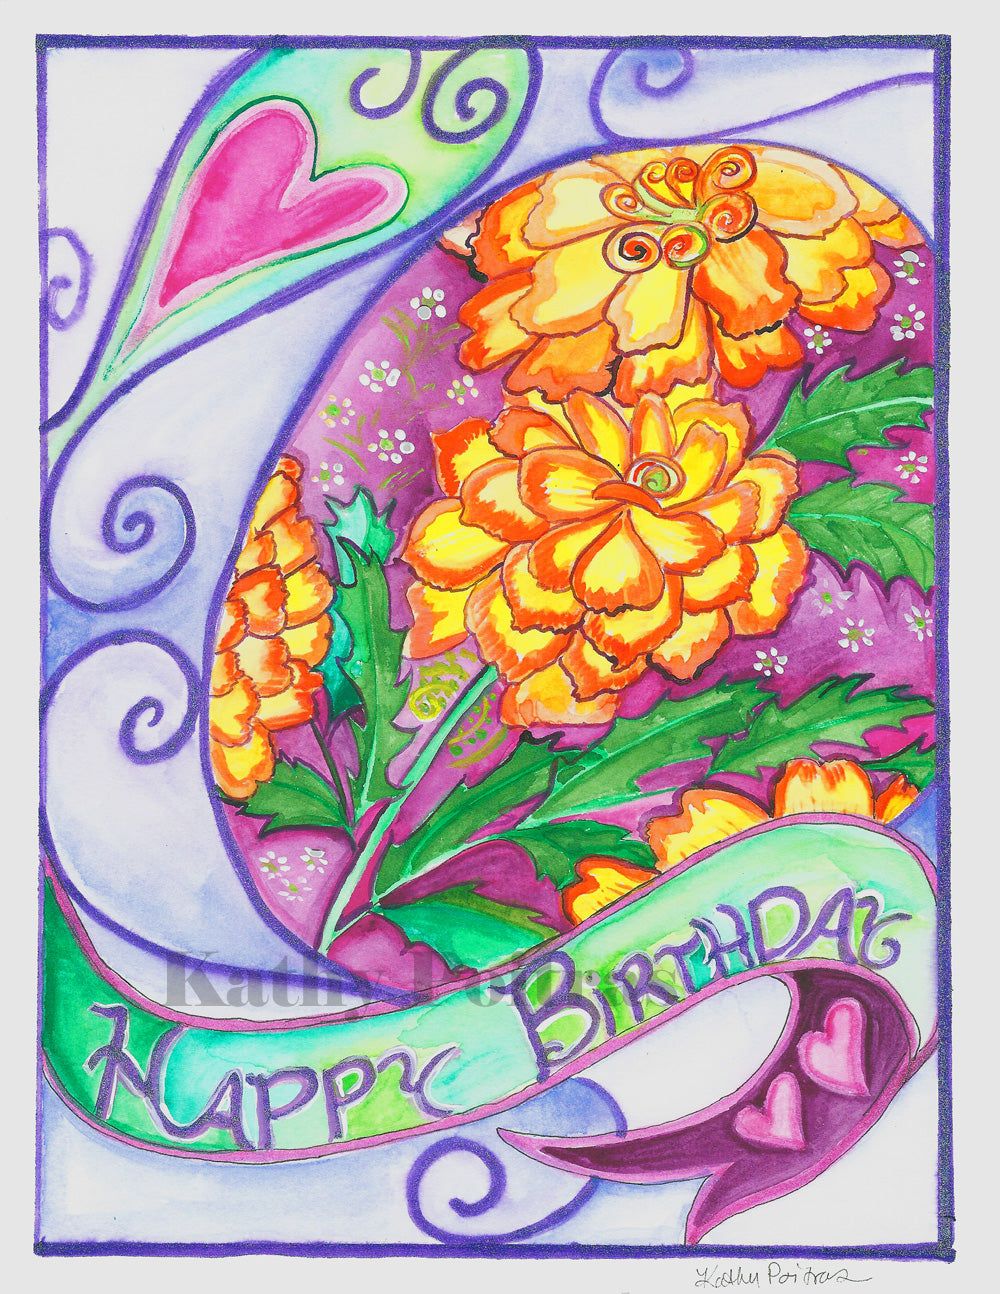 Hand made birthday card, in the naïve folk art style by Kathy Poitras. Inspired by the Iris birth  flower of the month for October.    Marigolds with a stain glass inspired background.  The original was created on watercolor paper. There are swirls and hearts and a swirly celebratory ribbon that says HAPPY BIRTHDAY.  